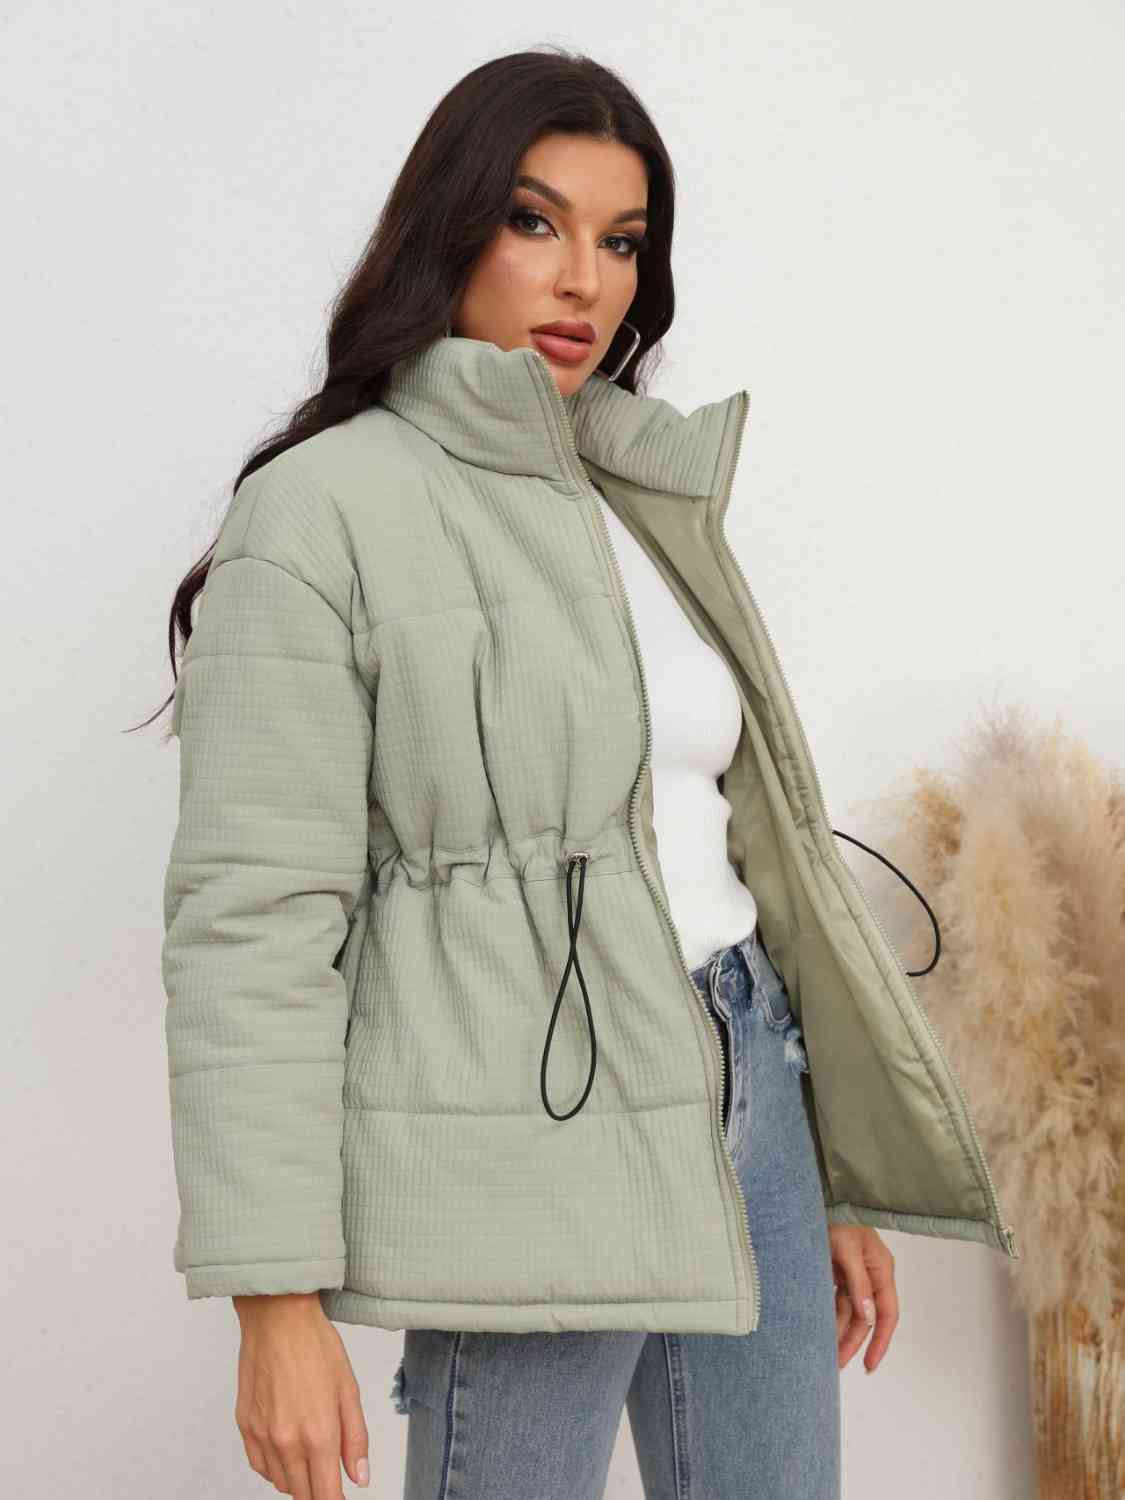 A "Waist Zip-Up Jacket" refers to a type of jacket with a zipper closure that runs along the waist area. This design allows for easy wear and removal and often provides a fitted and stylish look.